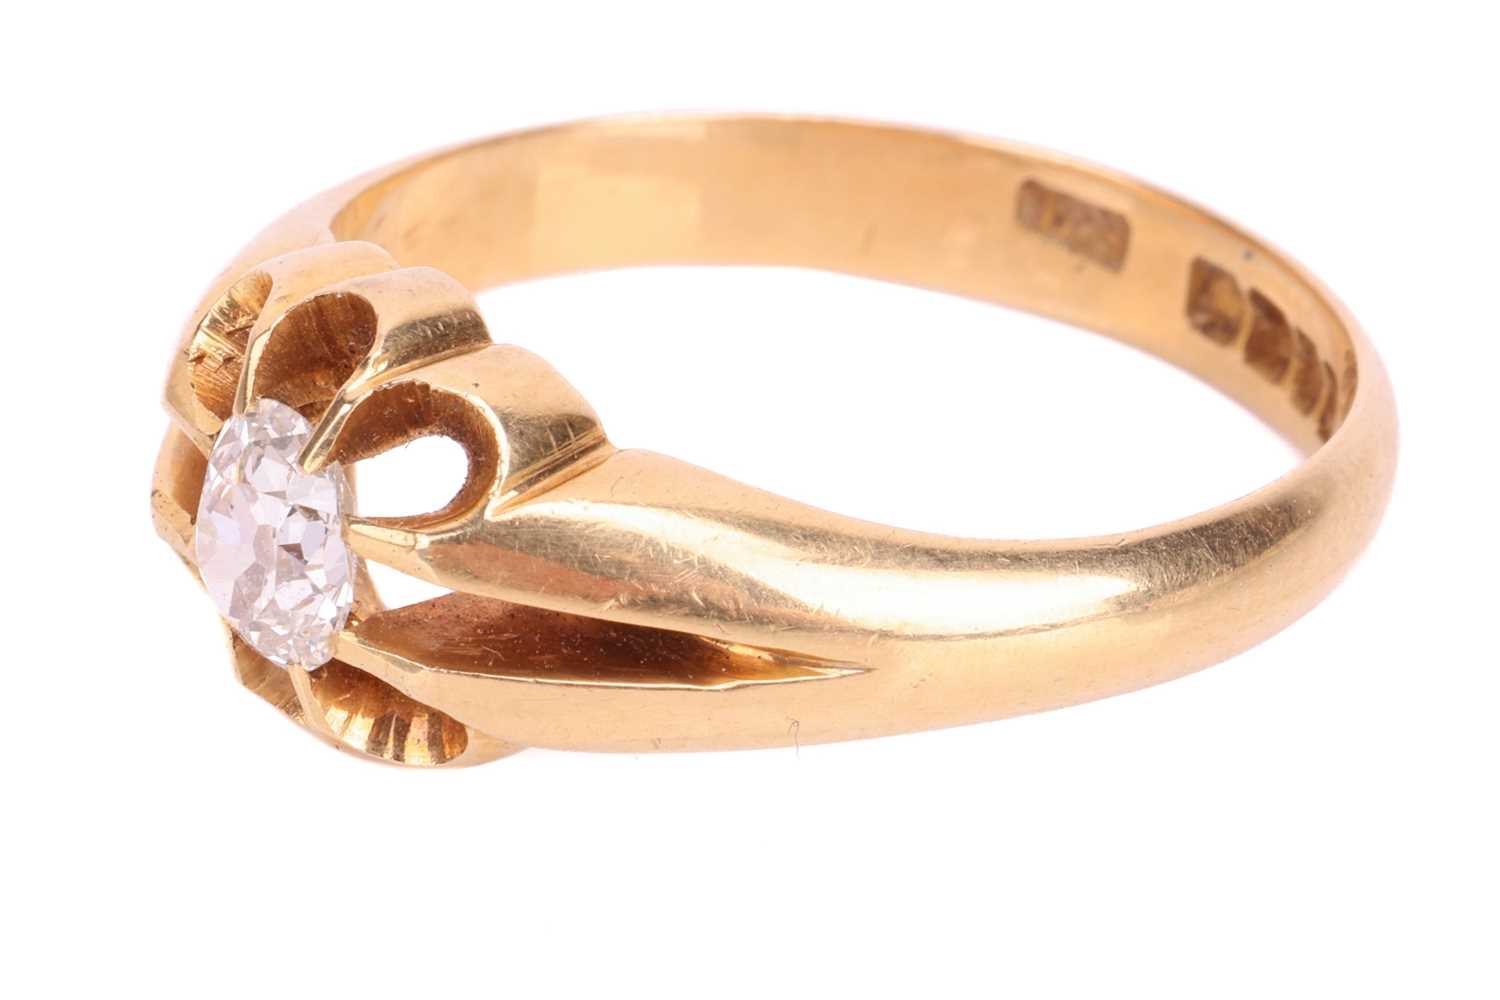 A diamond solitaire ring, set with a cushion shape old-cut diamond with an estimated weight of 0.50c - Image 3 of 4